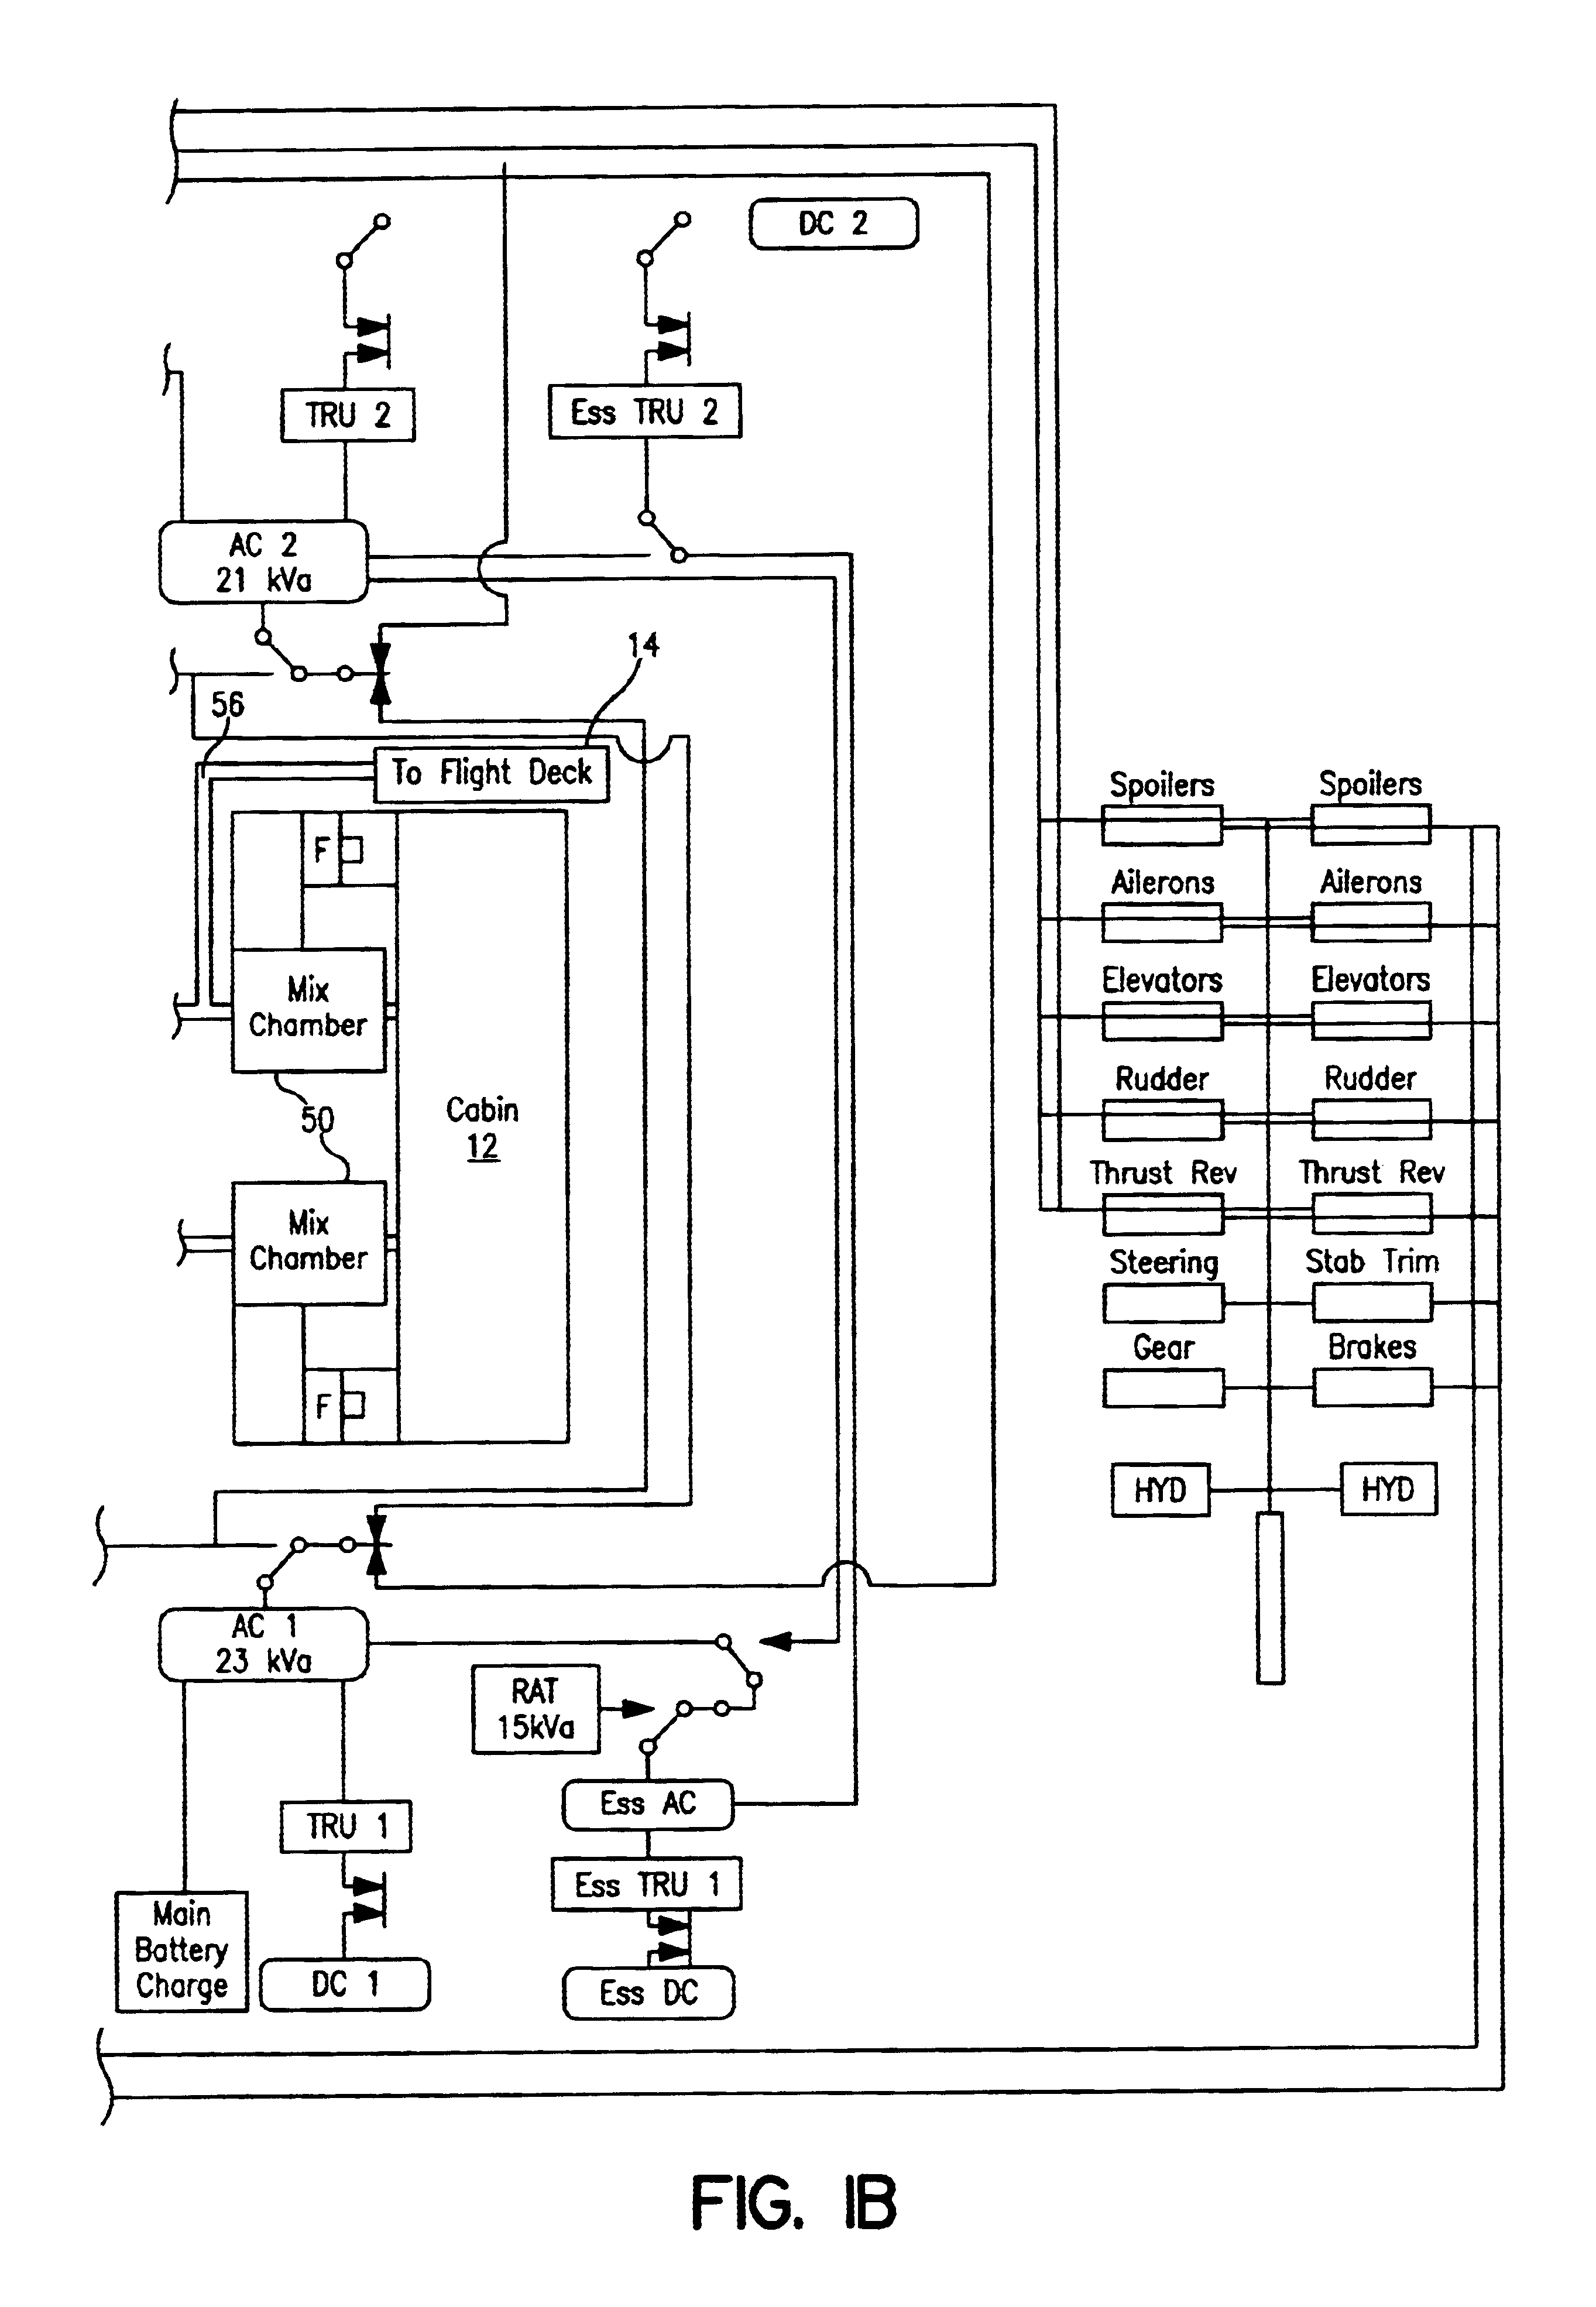 Electric power and cooling system for an aircraft